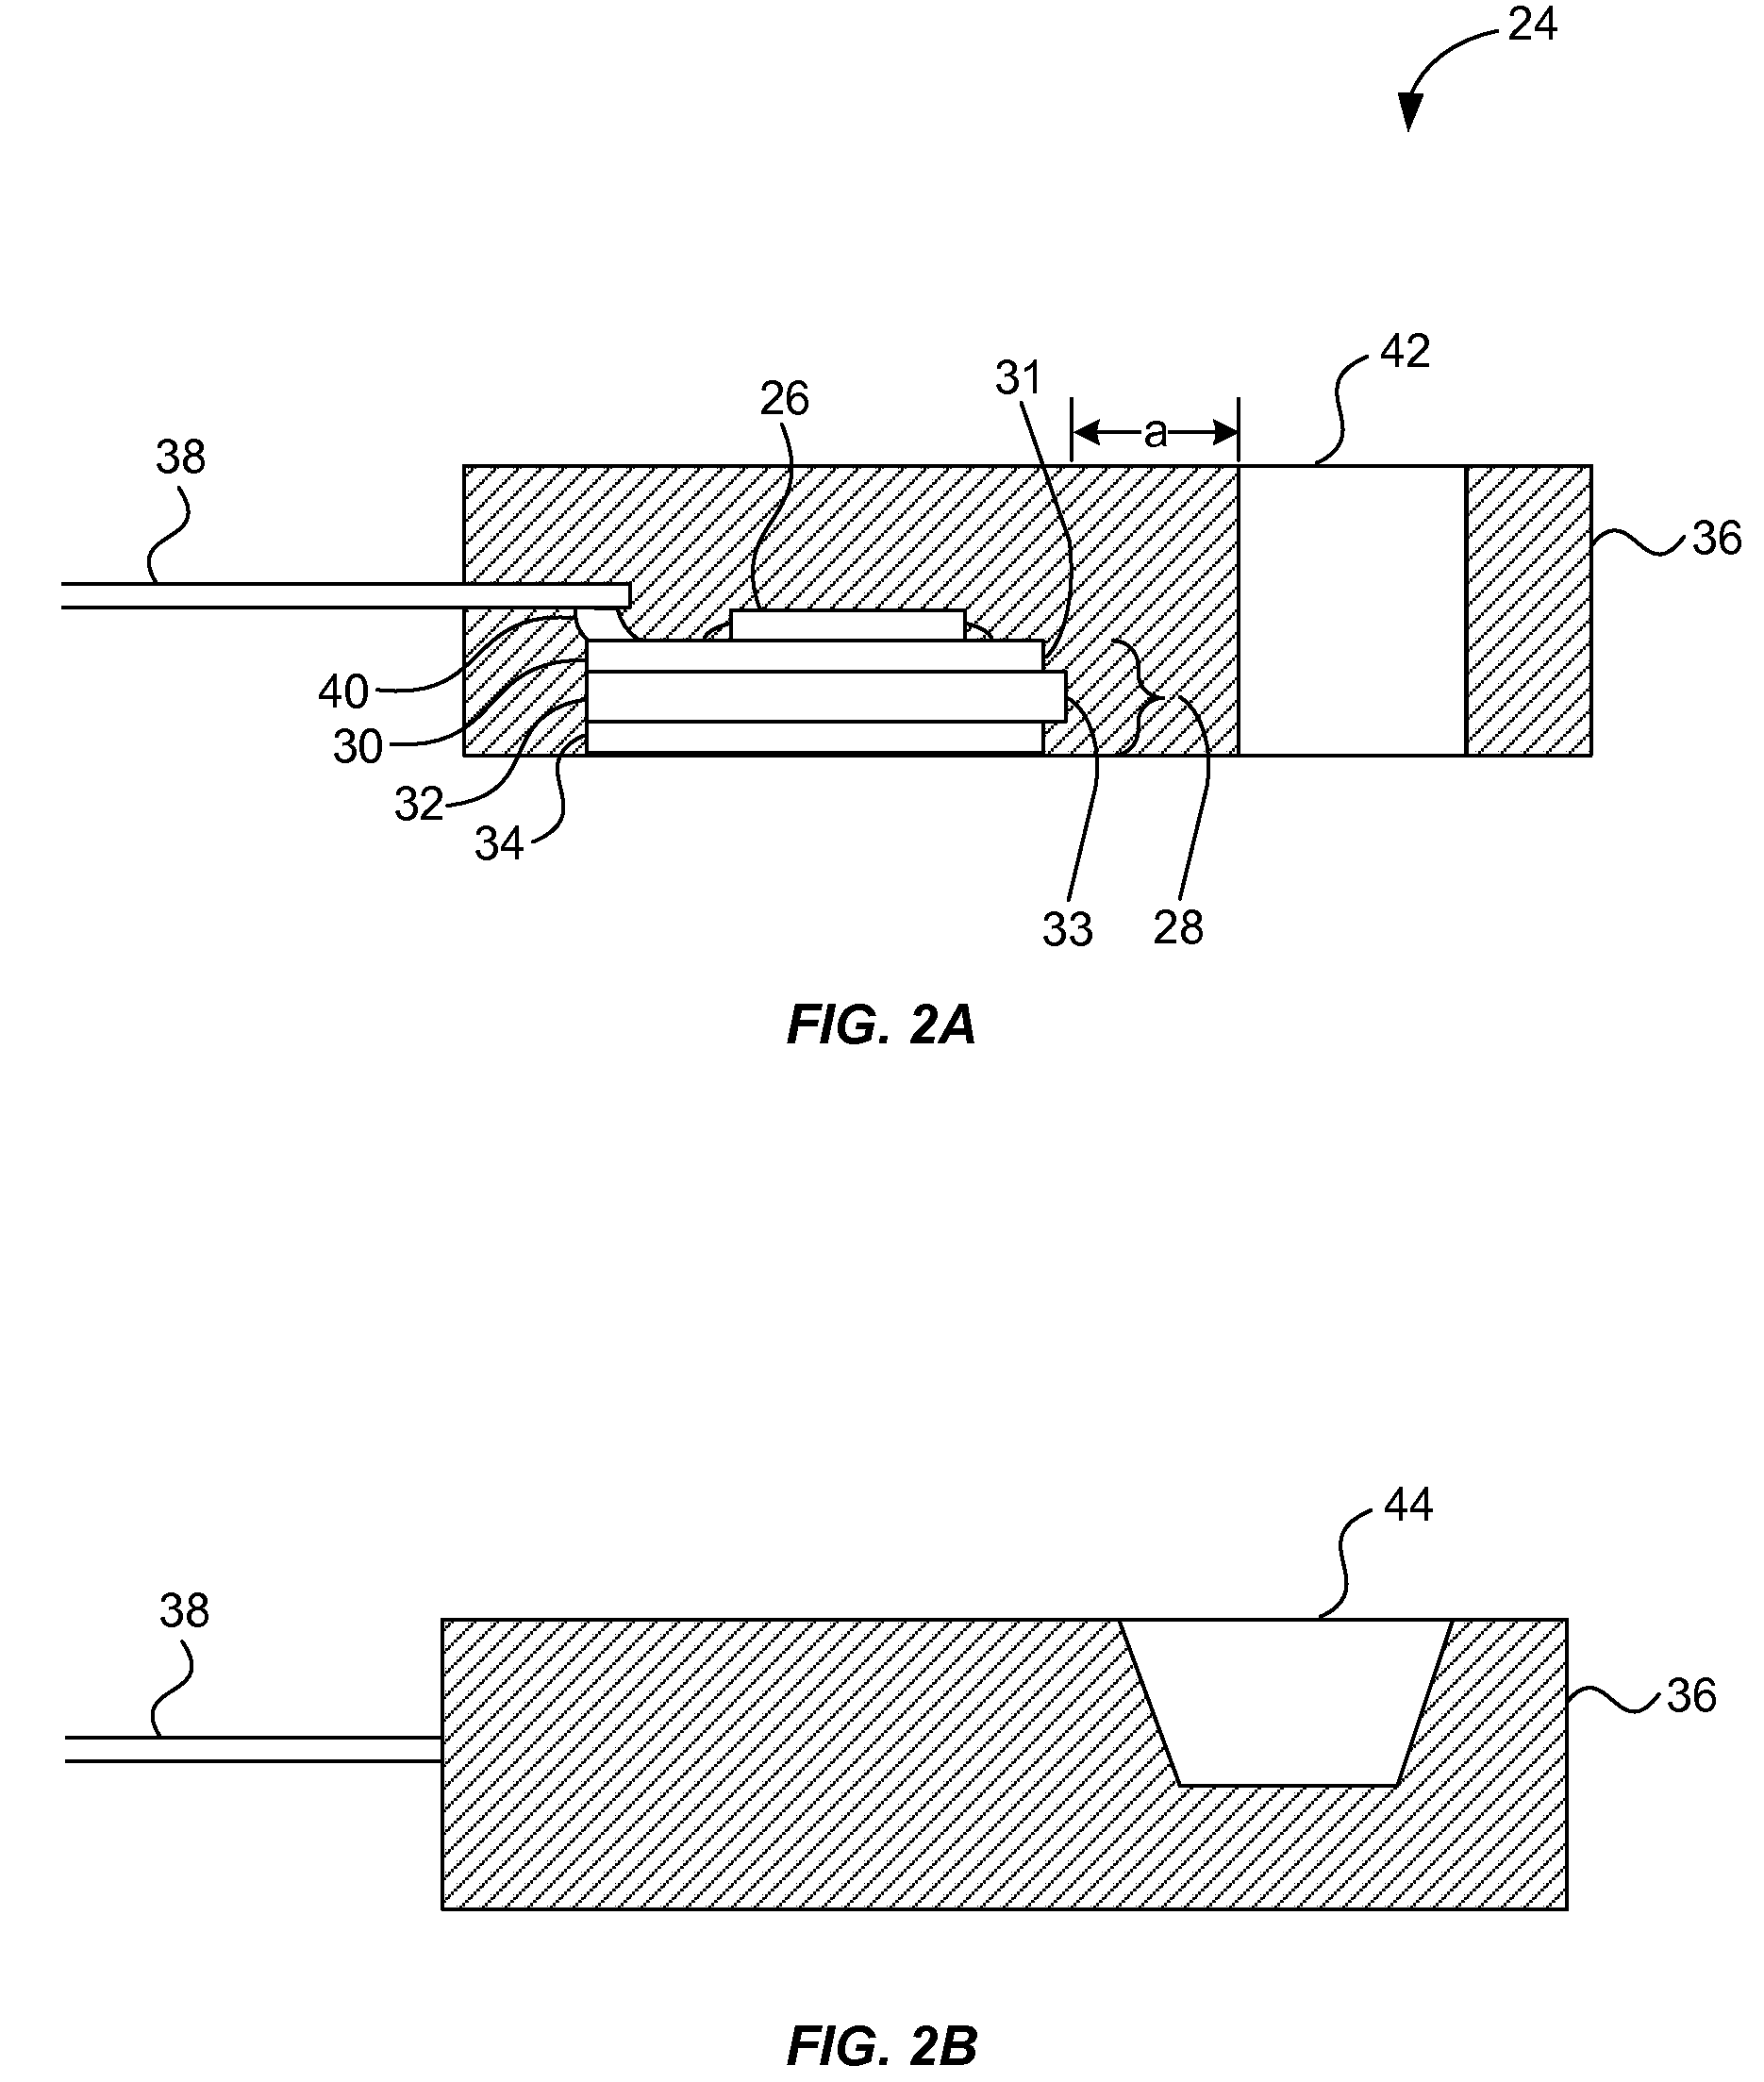 Electrically isolated power semiconductor package with optimized layout